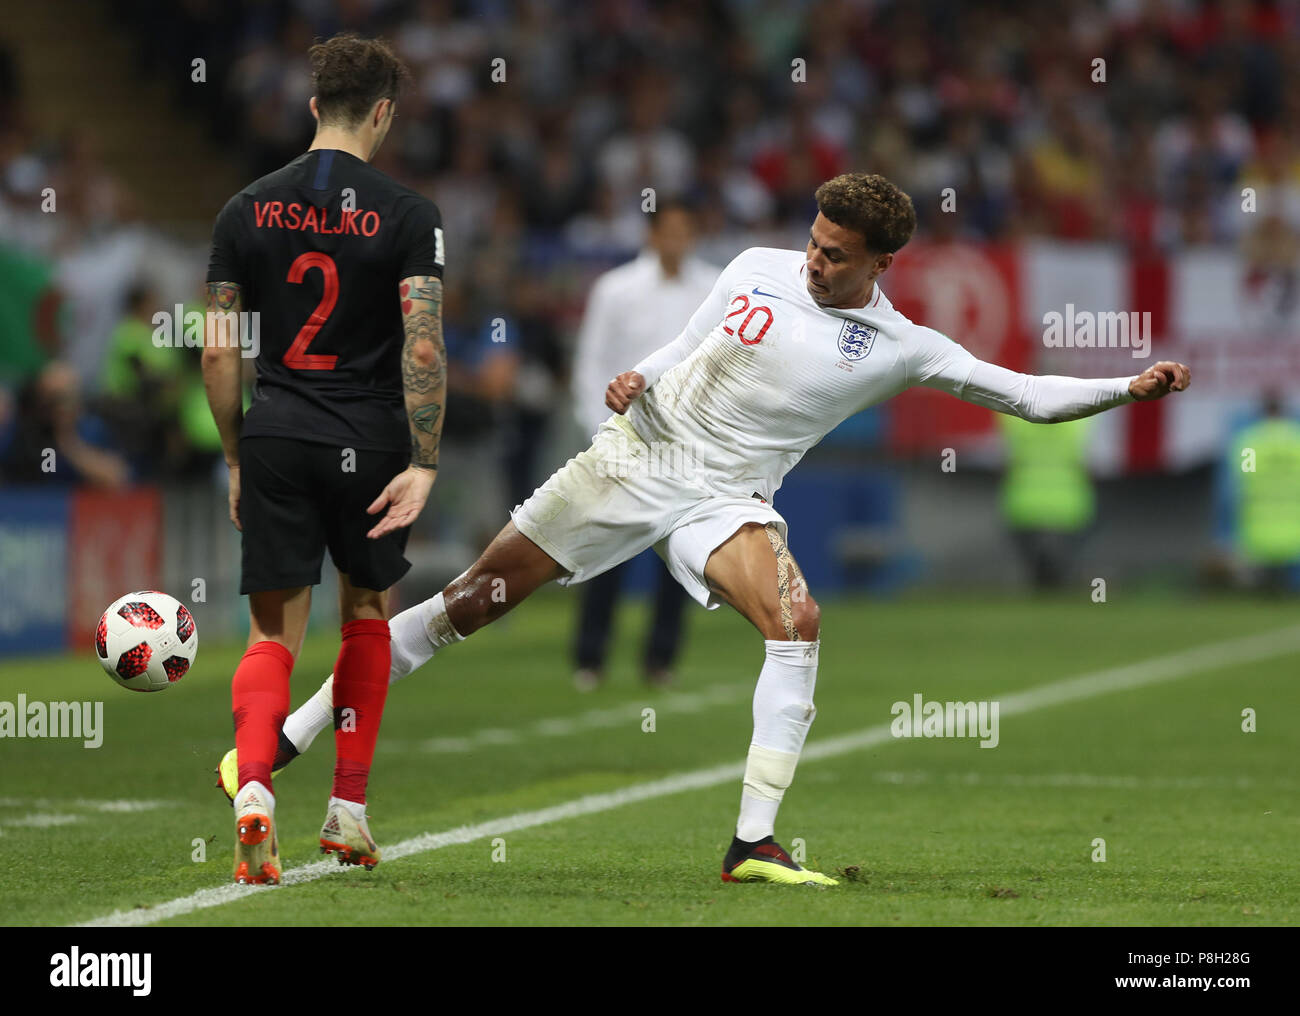 Moscow, Russia. 11th July, 2018. Dele Alli (R) of England vies with Sime Vrsaljko of Croatia during the 2018 FIFA World Cup semi-final match between England and Croatia in Moscow, Russia, July 11, 2018. Credit: Xu Zijian/Xinhua/Alamy Live News Stock Photo